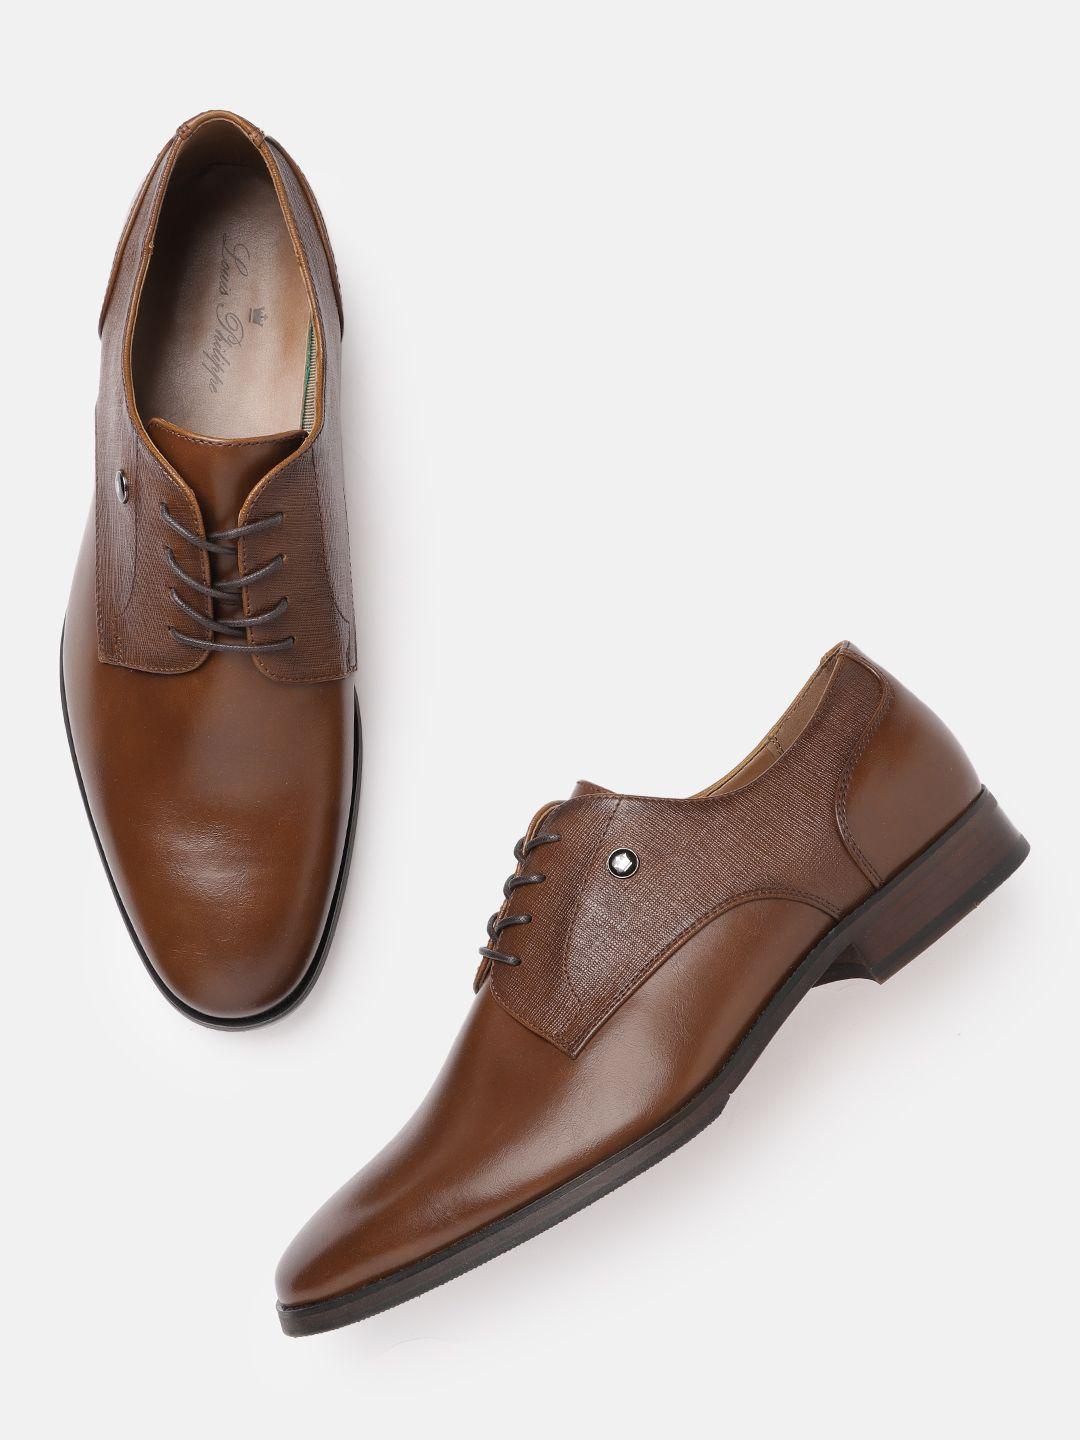 louis philippe coffee brown solid leather formal derbys with saffiano textured detail